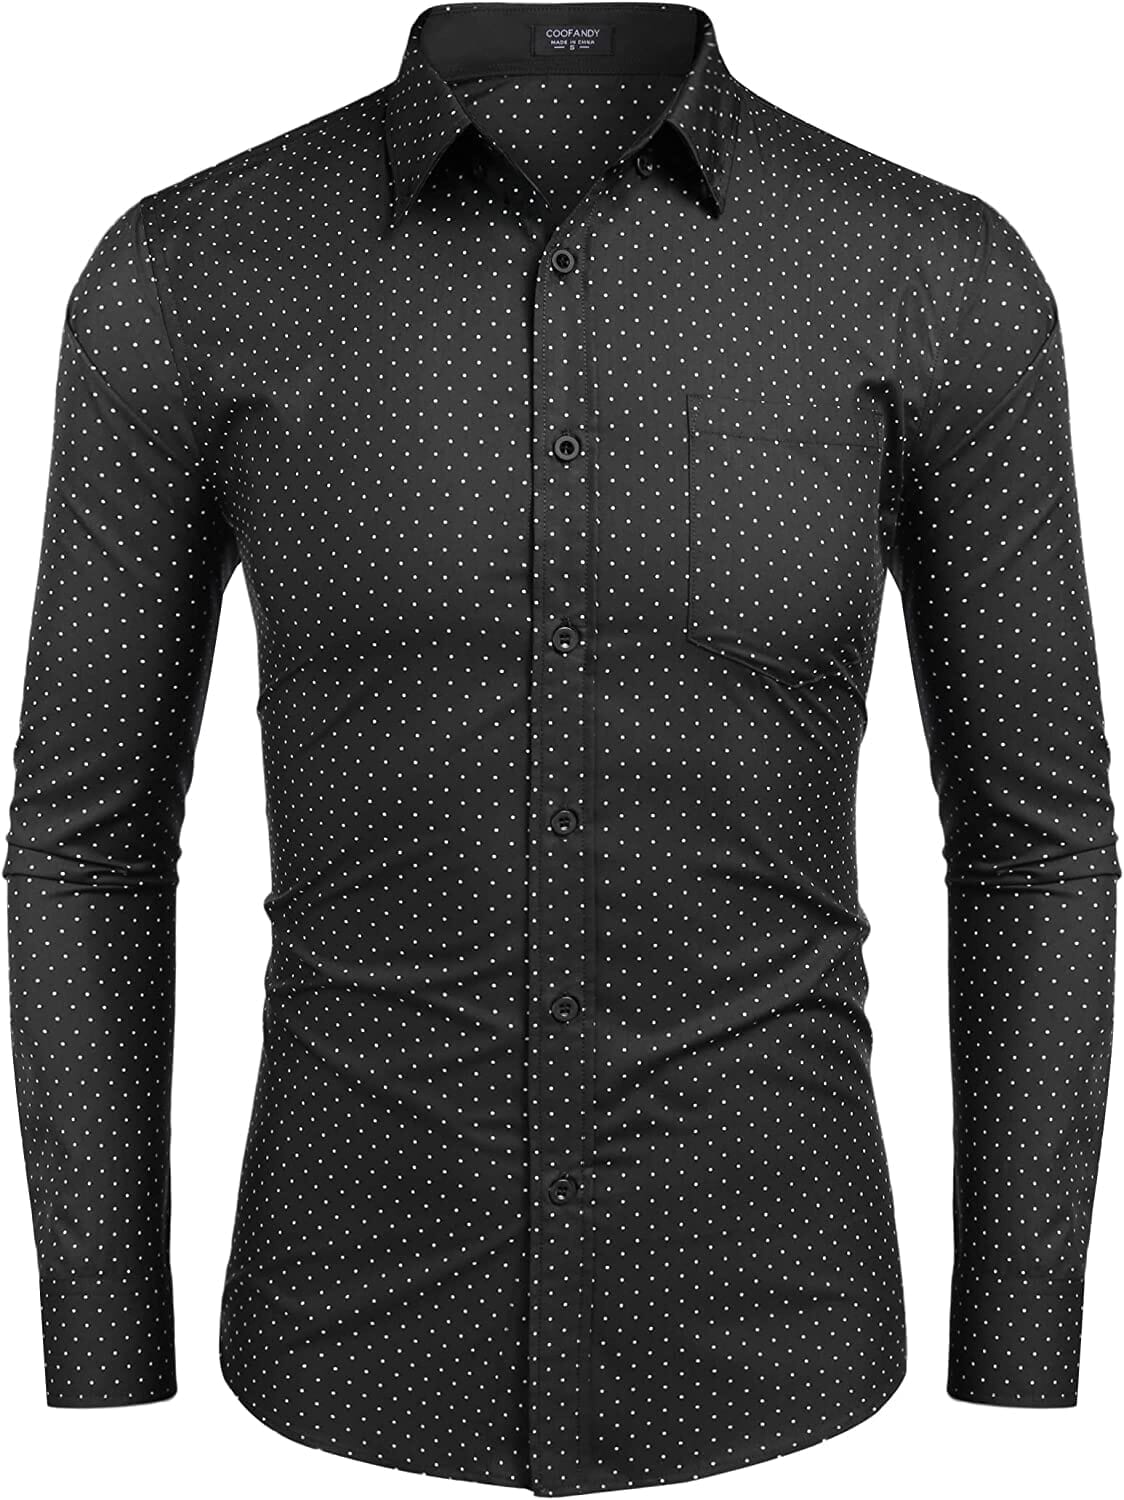 Coofandy Men's Casual Long Sleeve Shirt (US Only) Shirts Coofandy's 